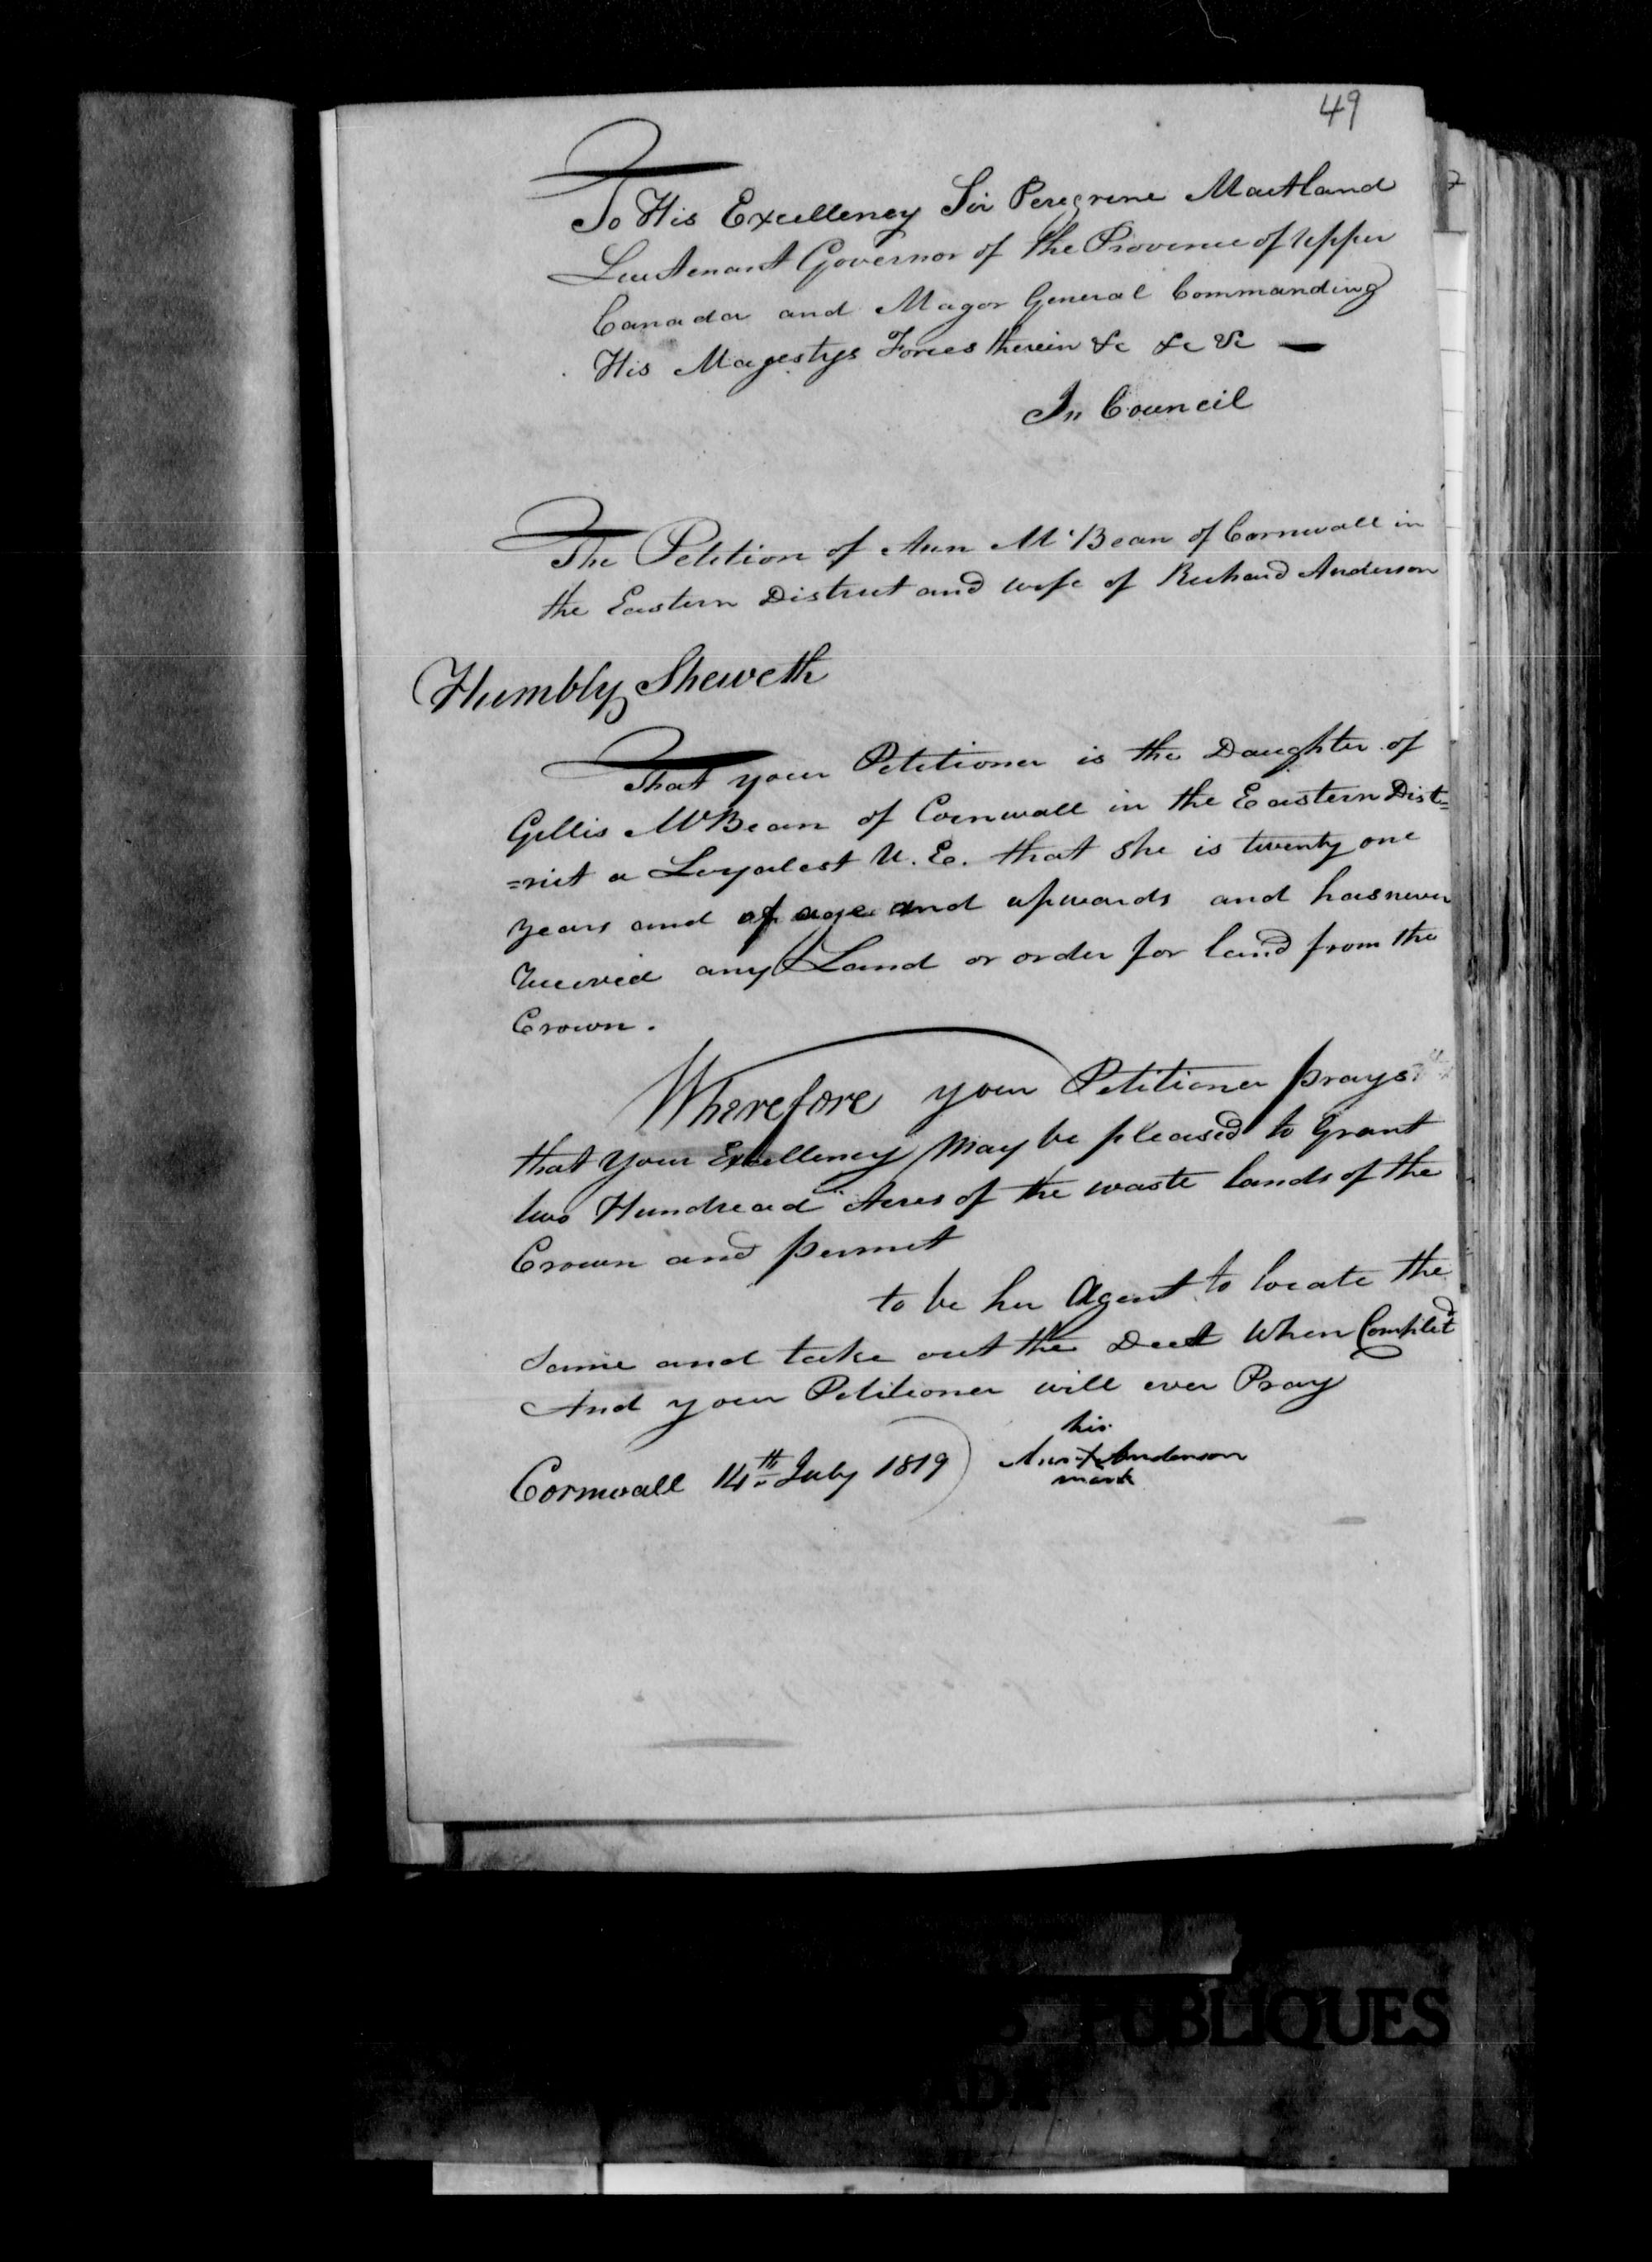 Title: Upper Canada Land Petitions (1763-1865) - Mikan Number: 205131 - Microform: c-1611